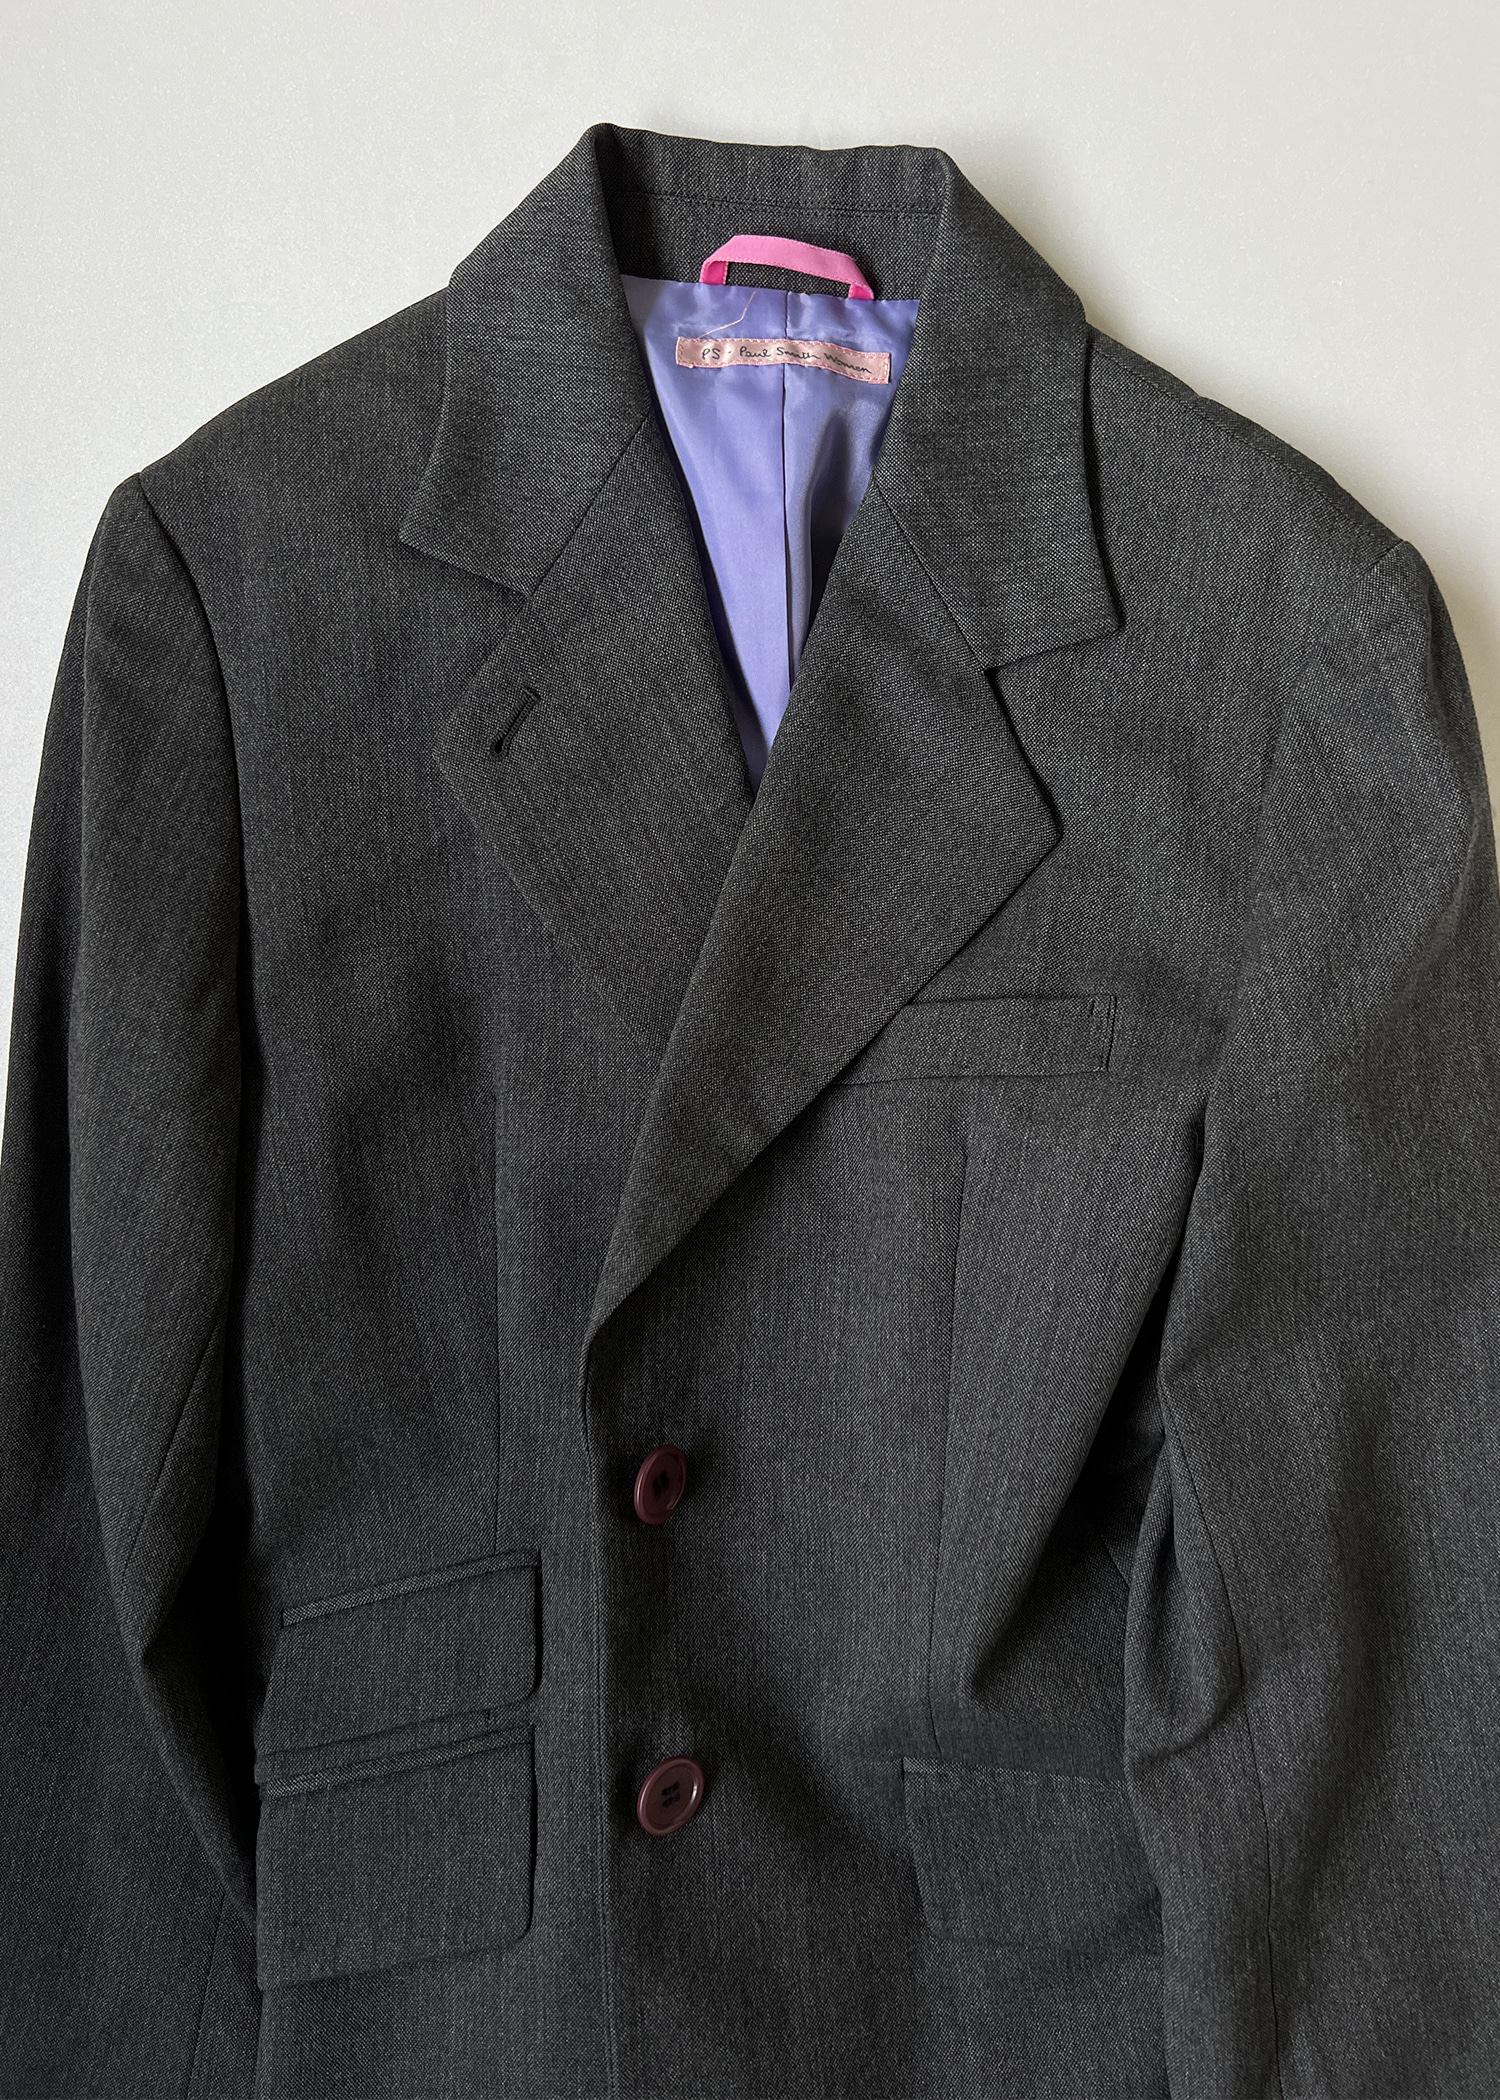 Paul smith solid jacket